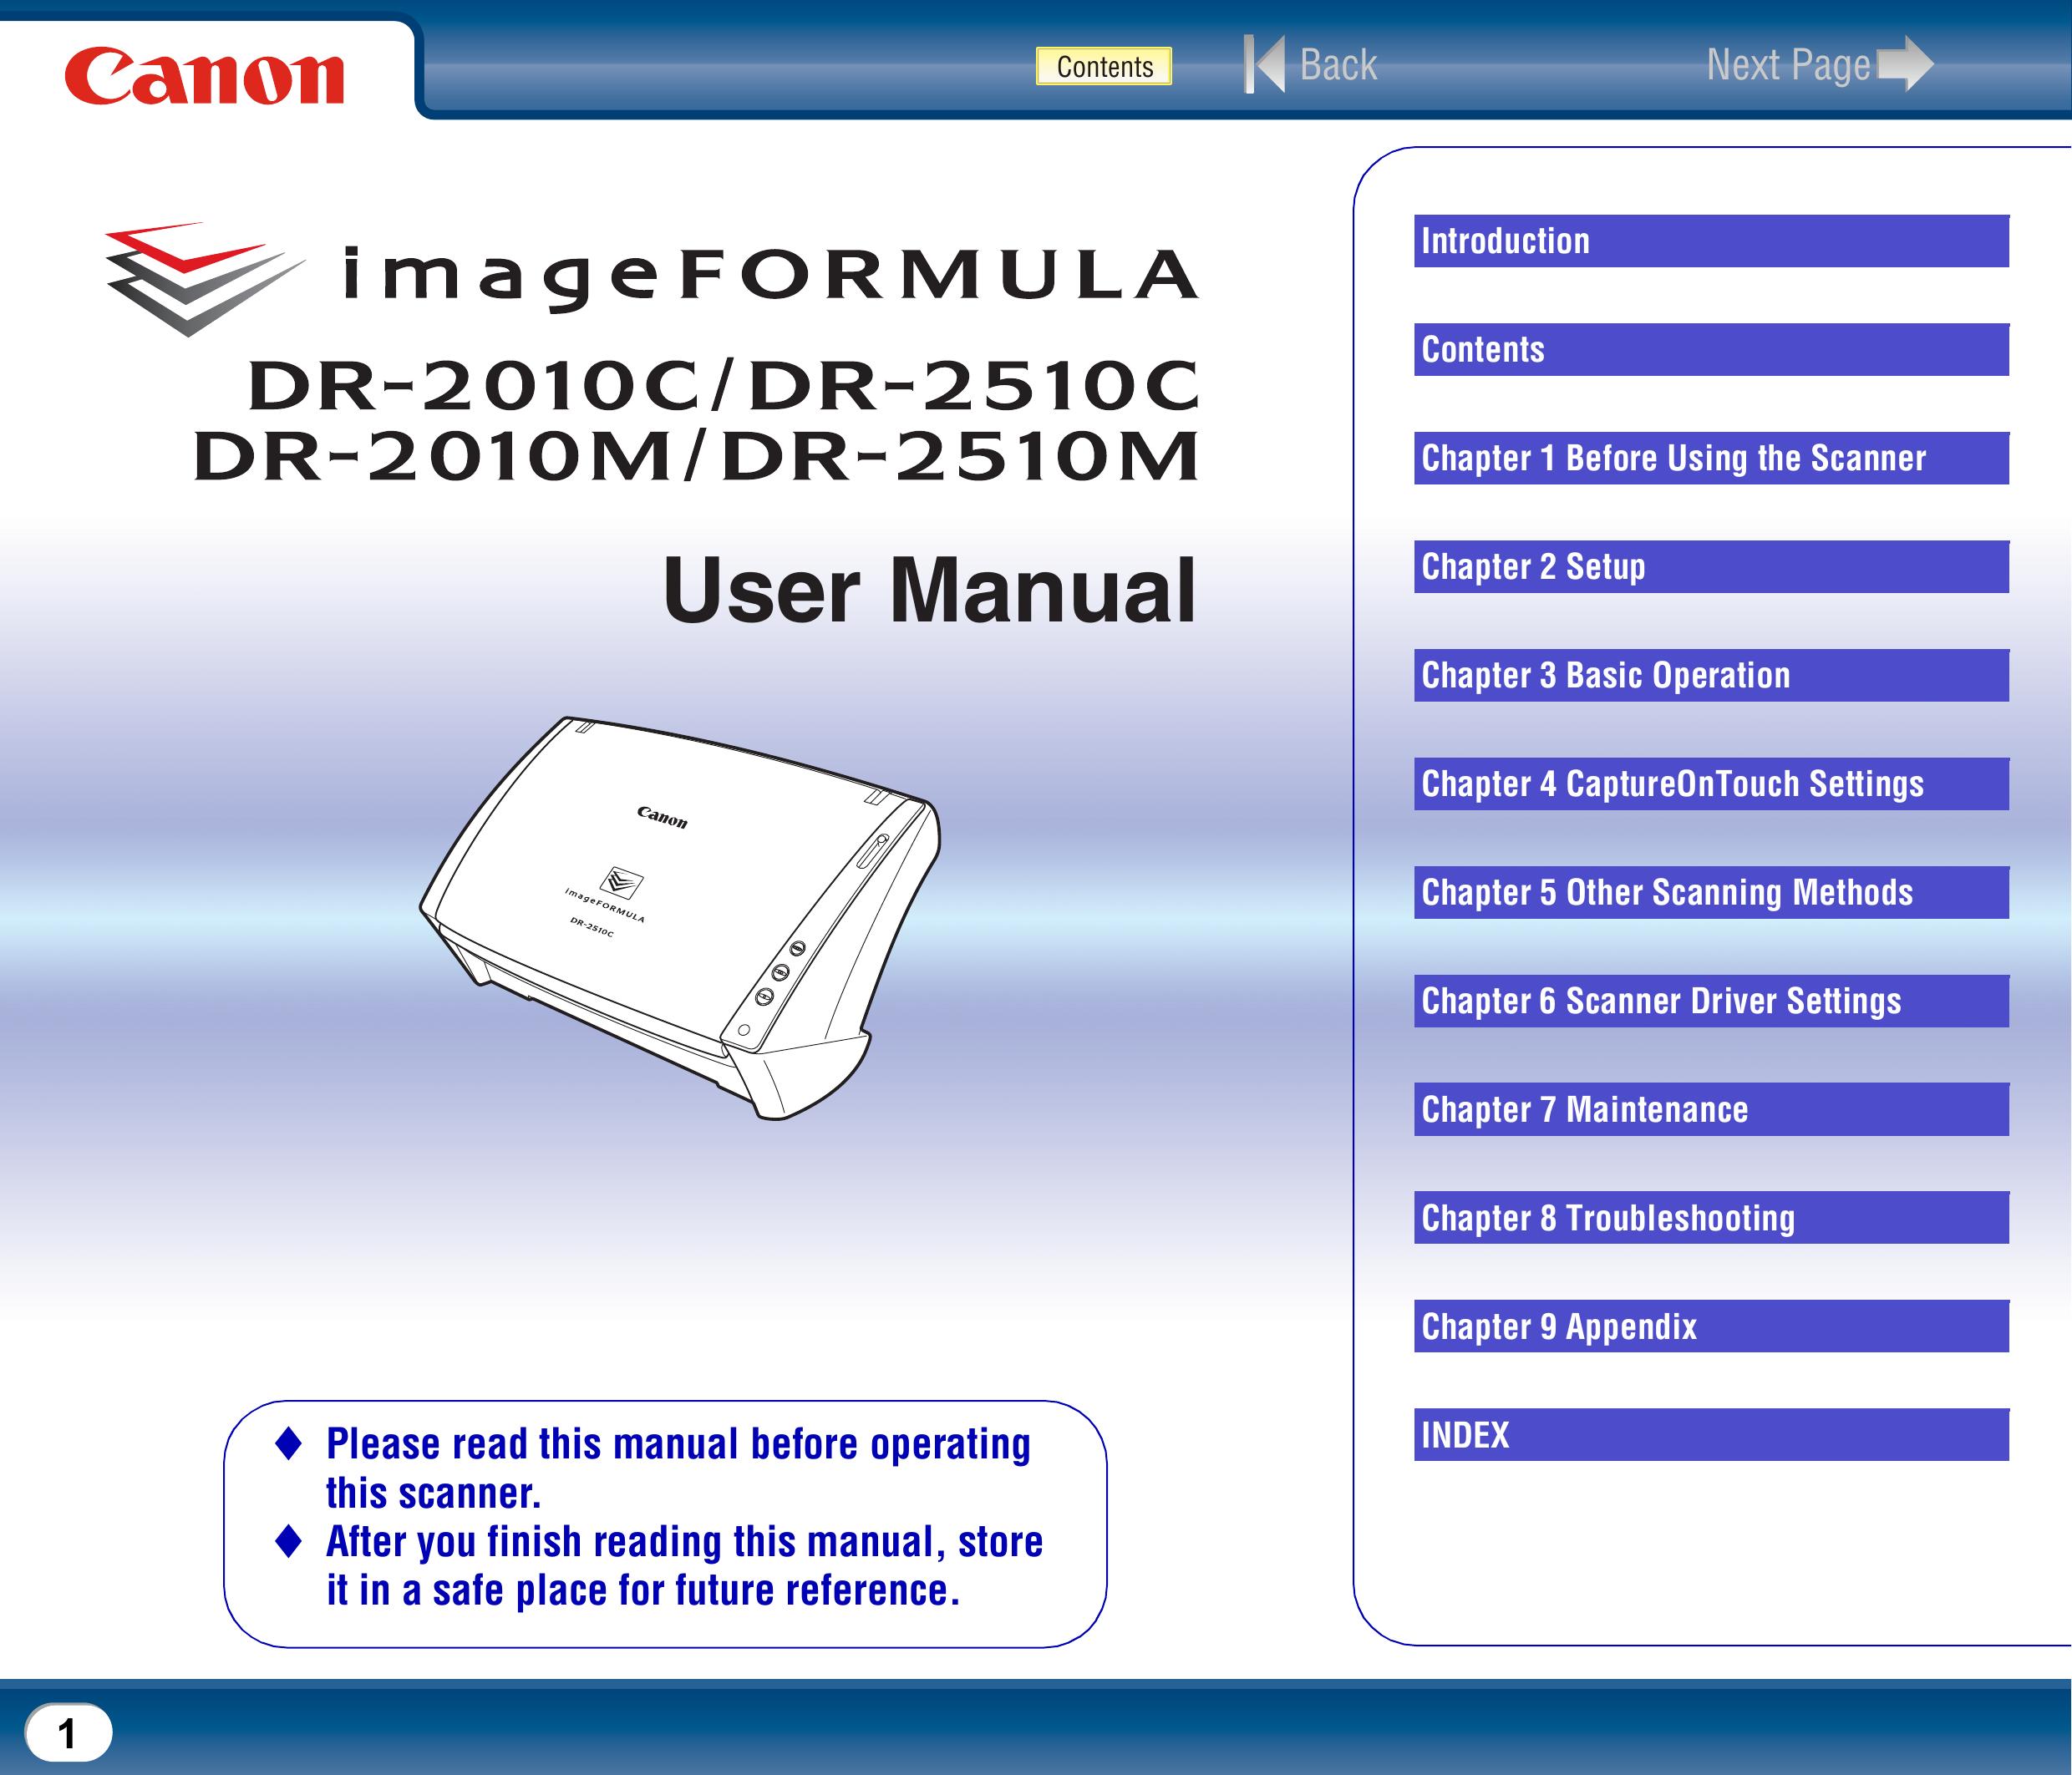 Canon DR-2510M Photo Scanner User Manual